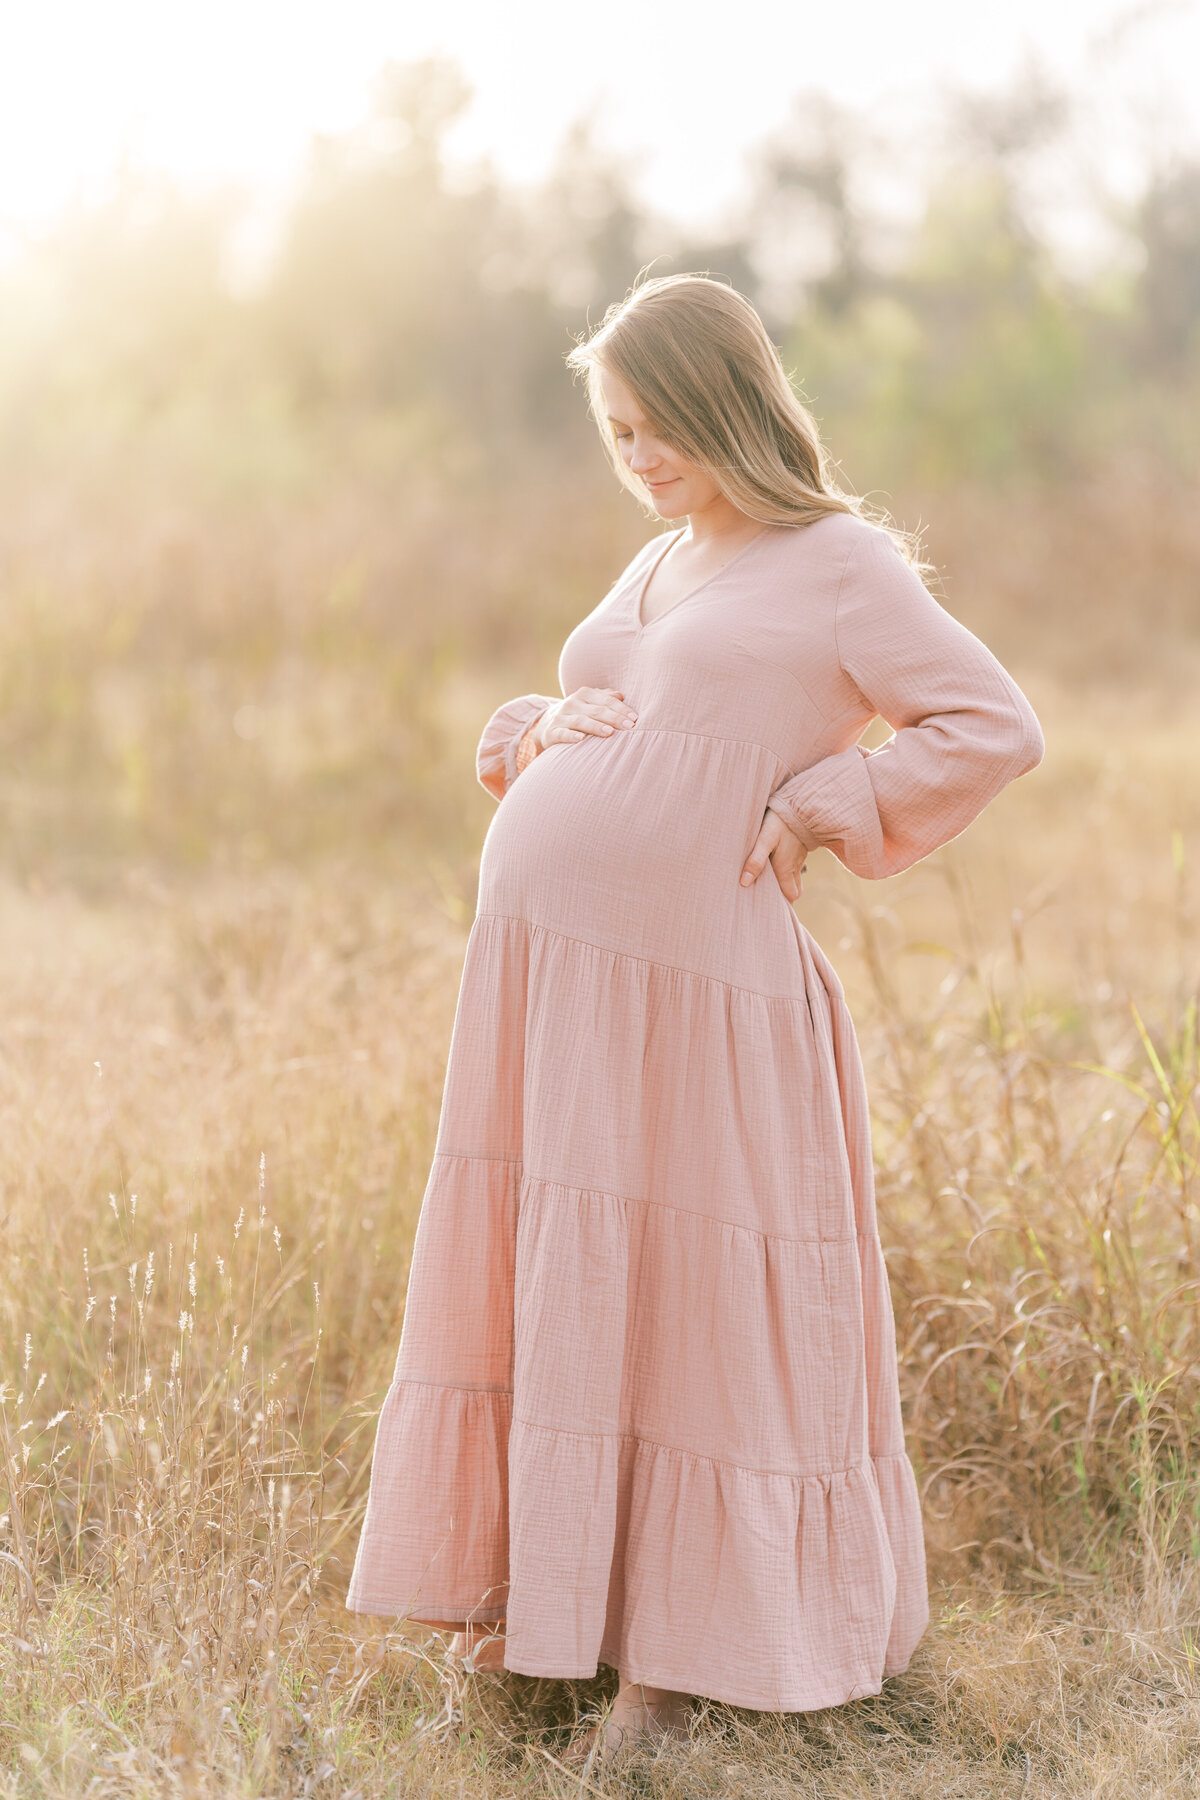 Portrait of a pregnant woman in a country field wearing a pink sundress, smiling while looking down at her belly.